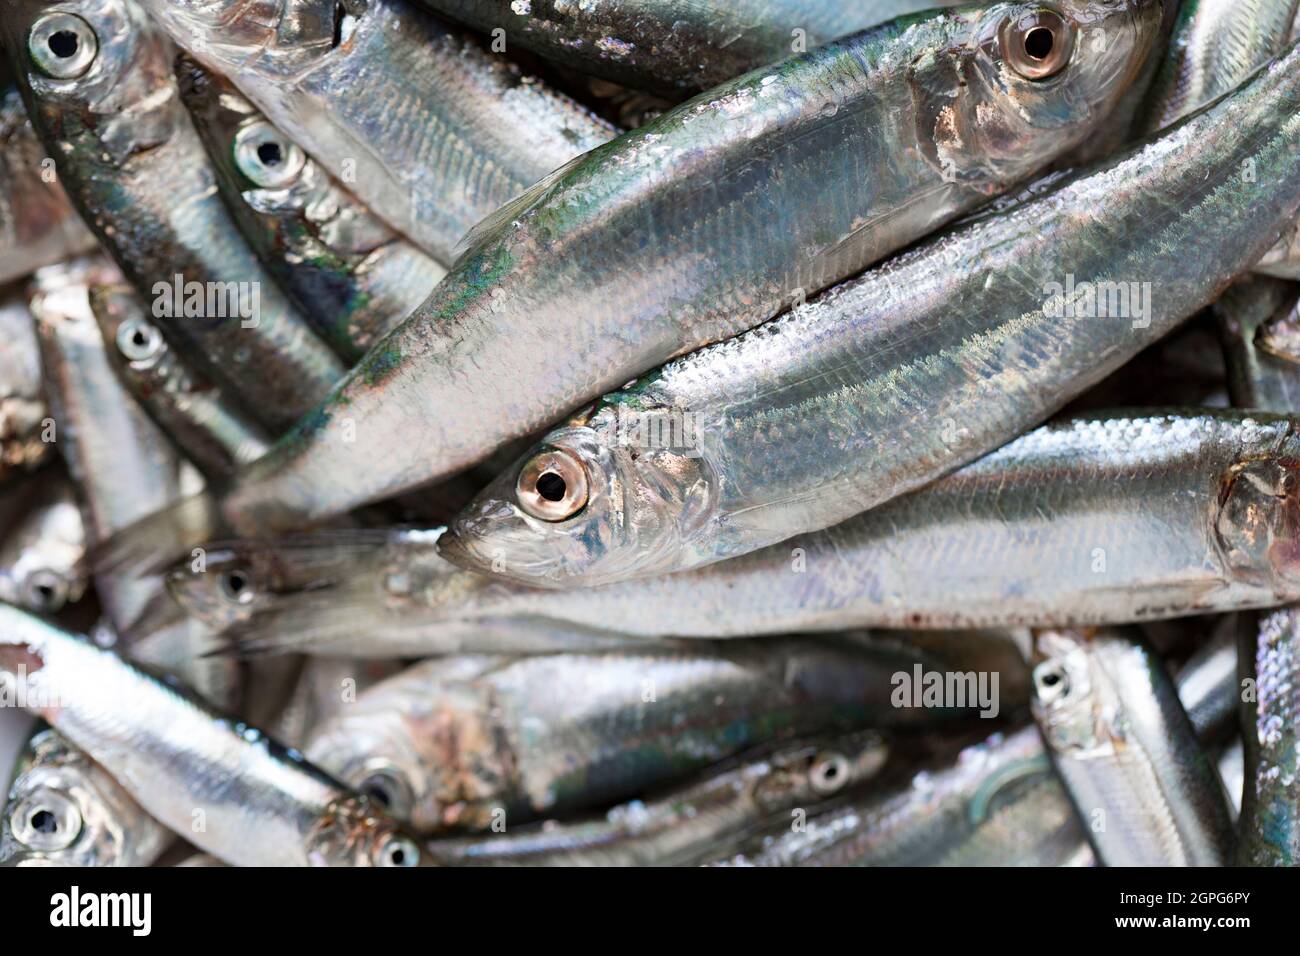 Fresh, raw sprats, Sprattus sprattus, caught in Lyme Bay Dorset. Sprats are a small, shoaling fish that are high in fish oils and often sold labelled Stock Photo